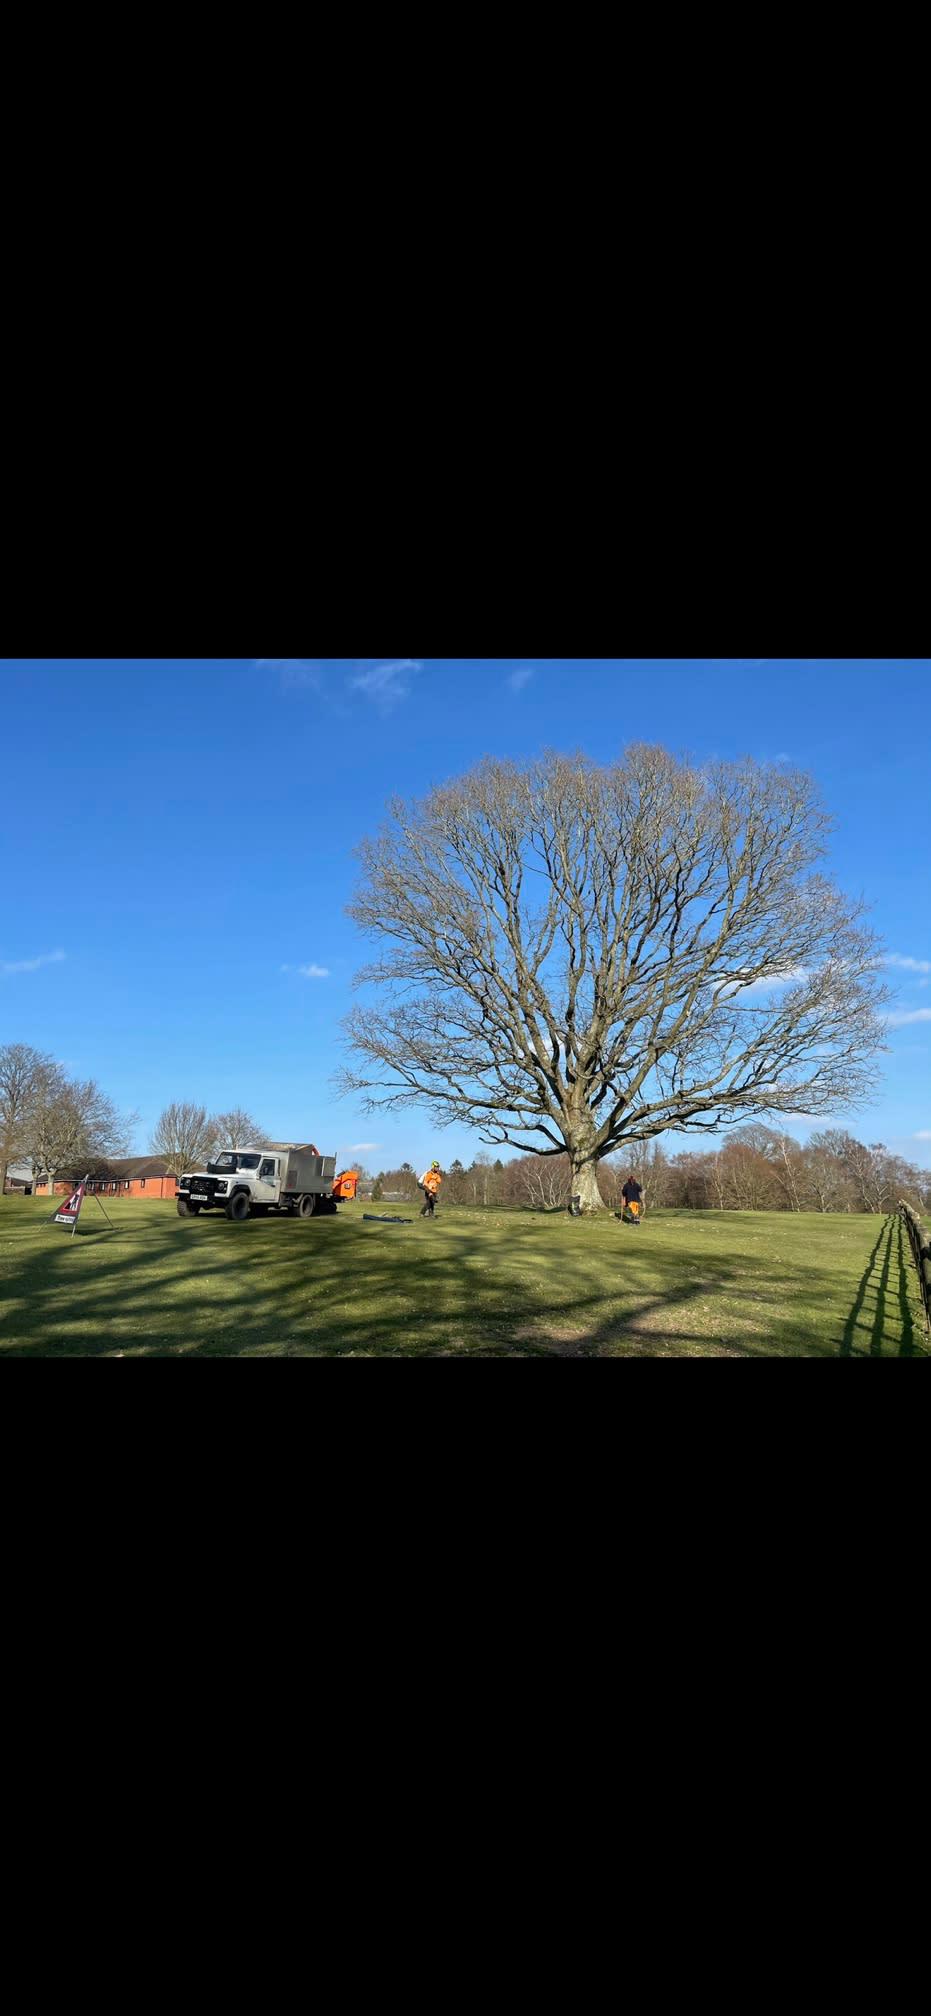 Images Elwy Valley Tree Services